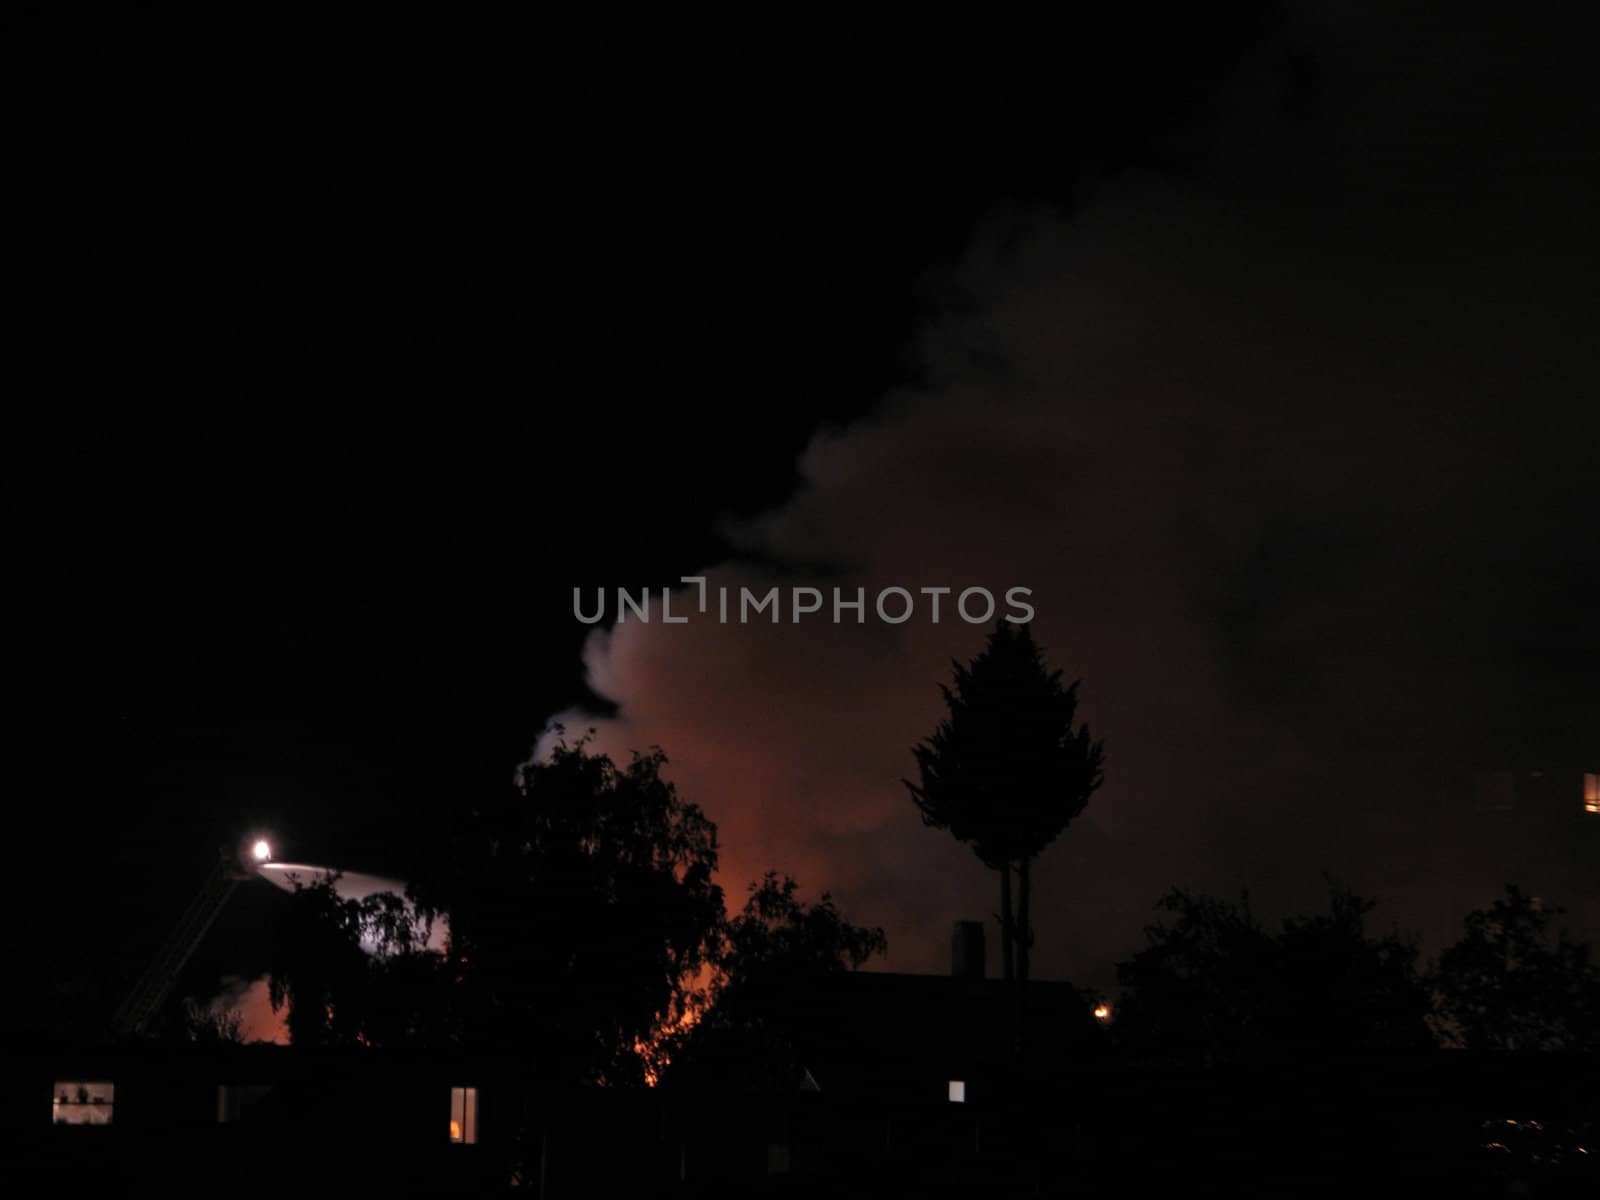 large fire in the night